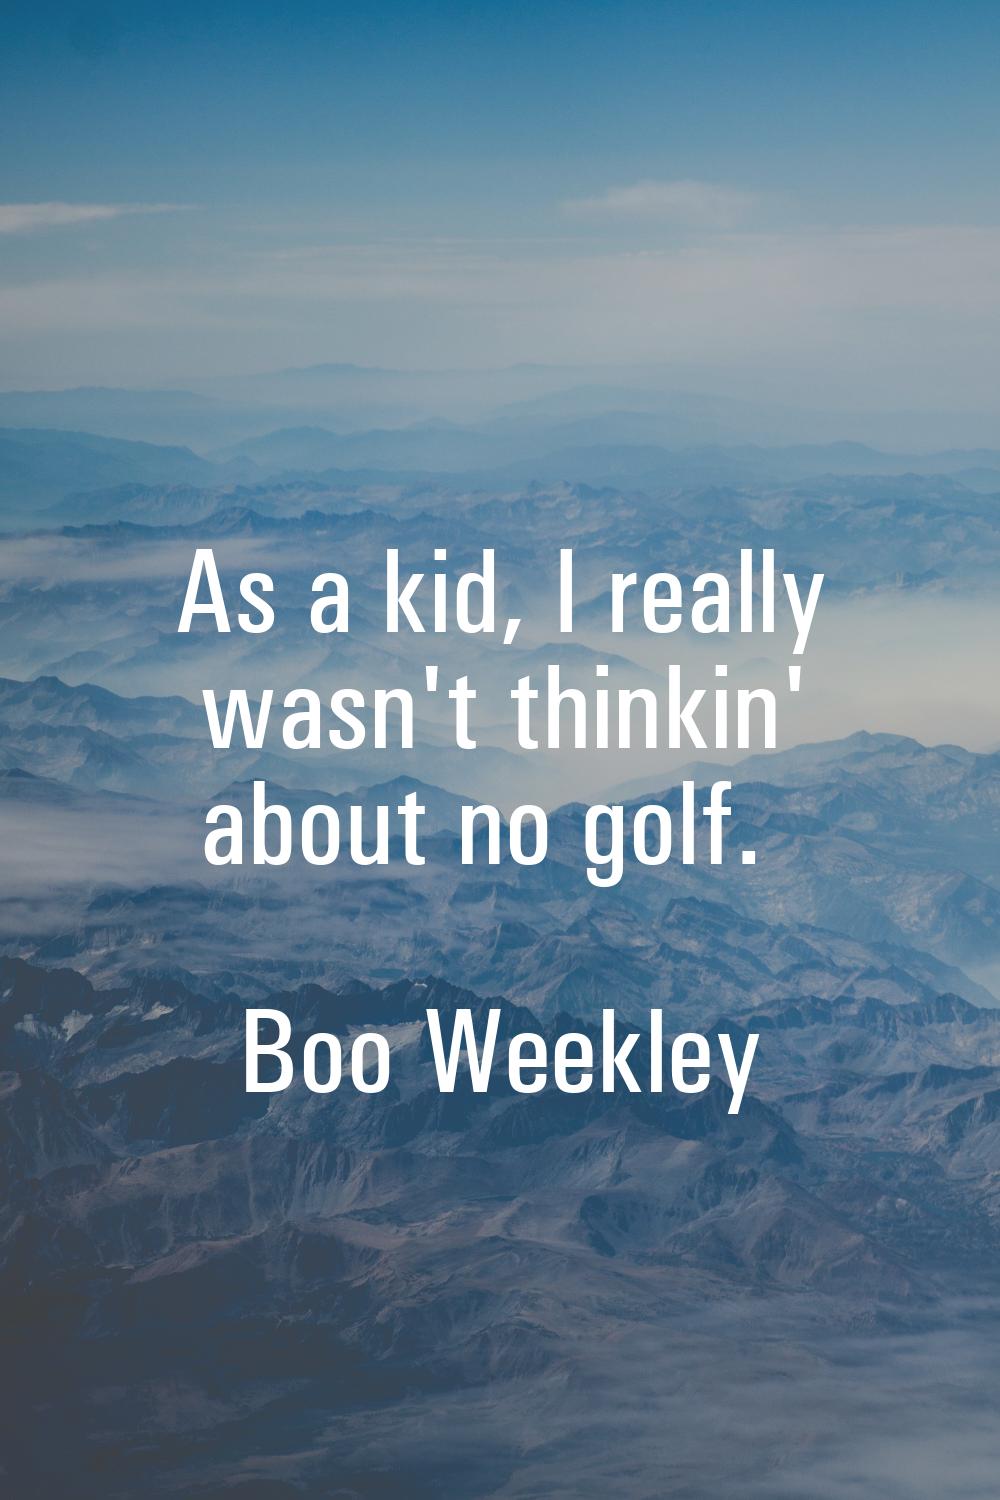 As a kid, I really wasn't thinkin' about no golf.